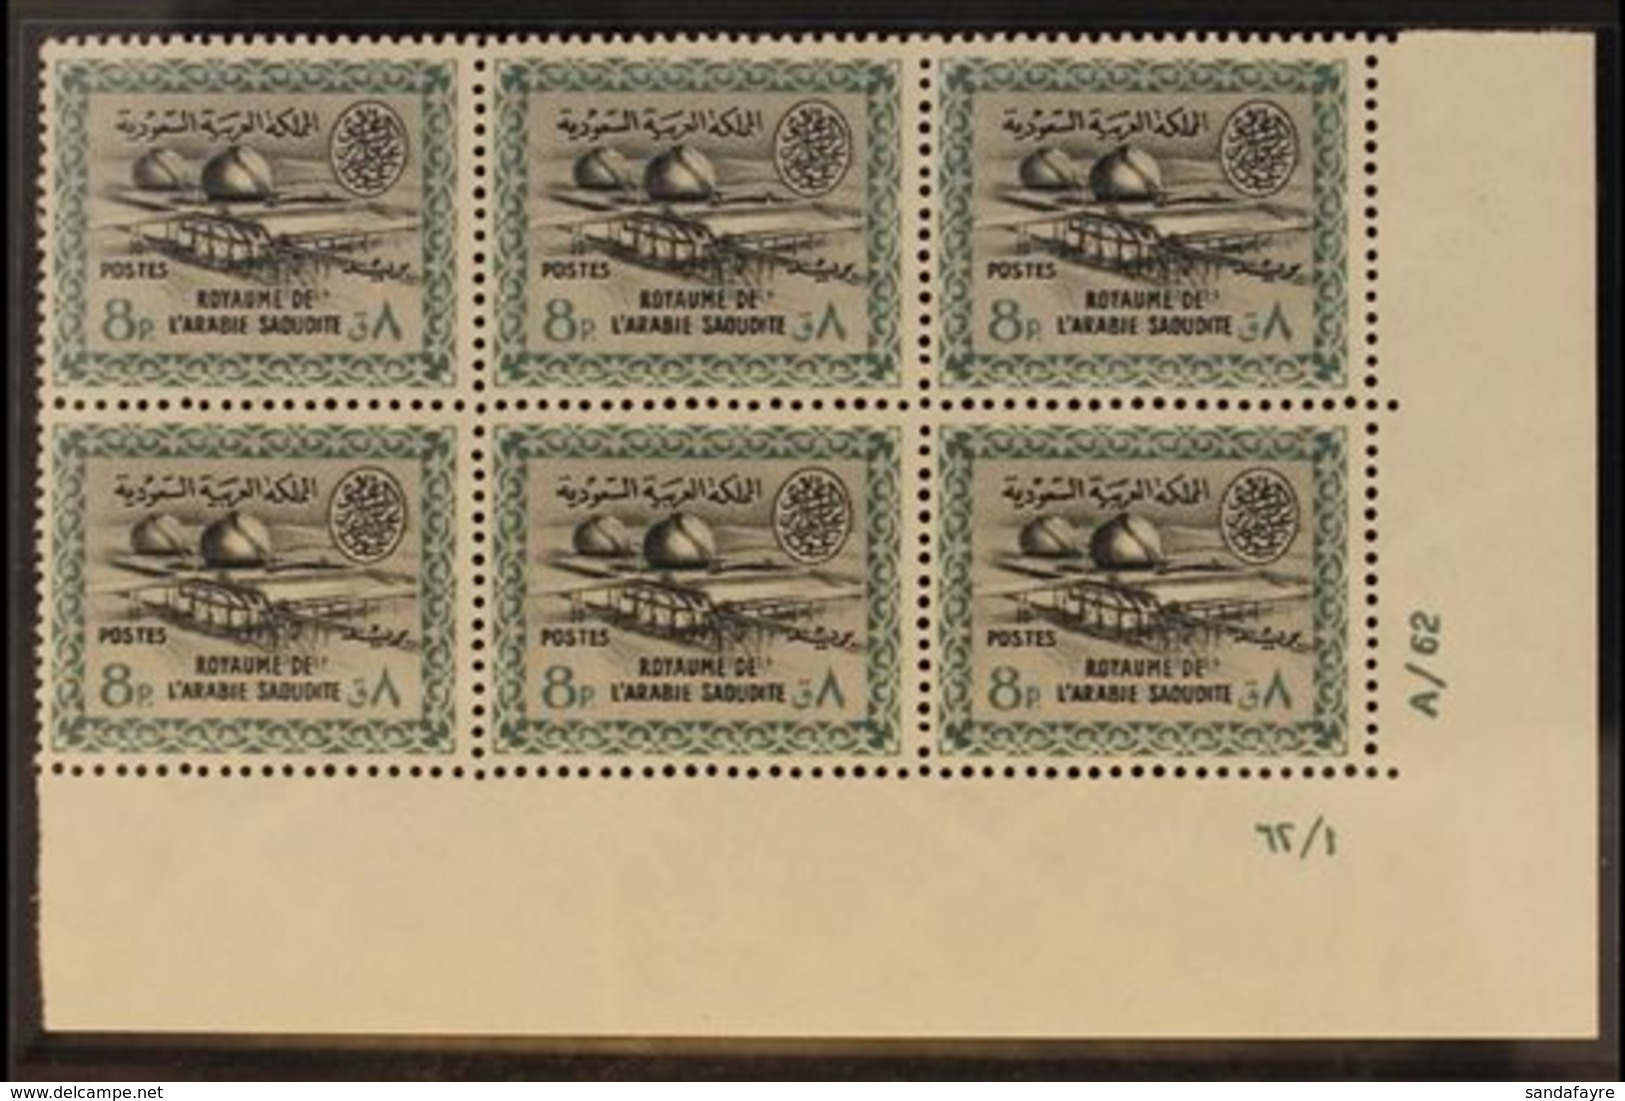 1963 8p Gas Oil Plant, Wmk Palm And Crossed Swords, SG 473, Superb Never Hinged Mint Corner Plate Block Of 6. For More I - Saoedi-Arabië